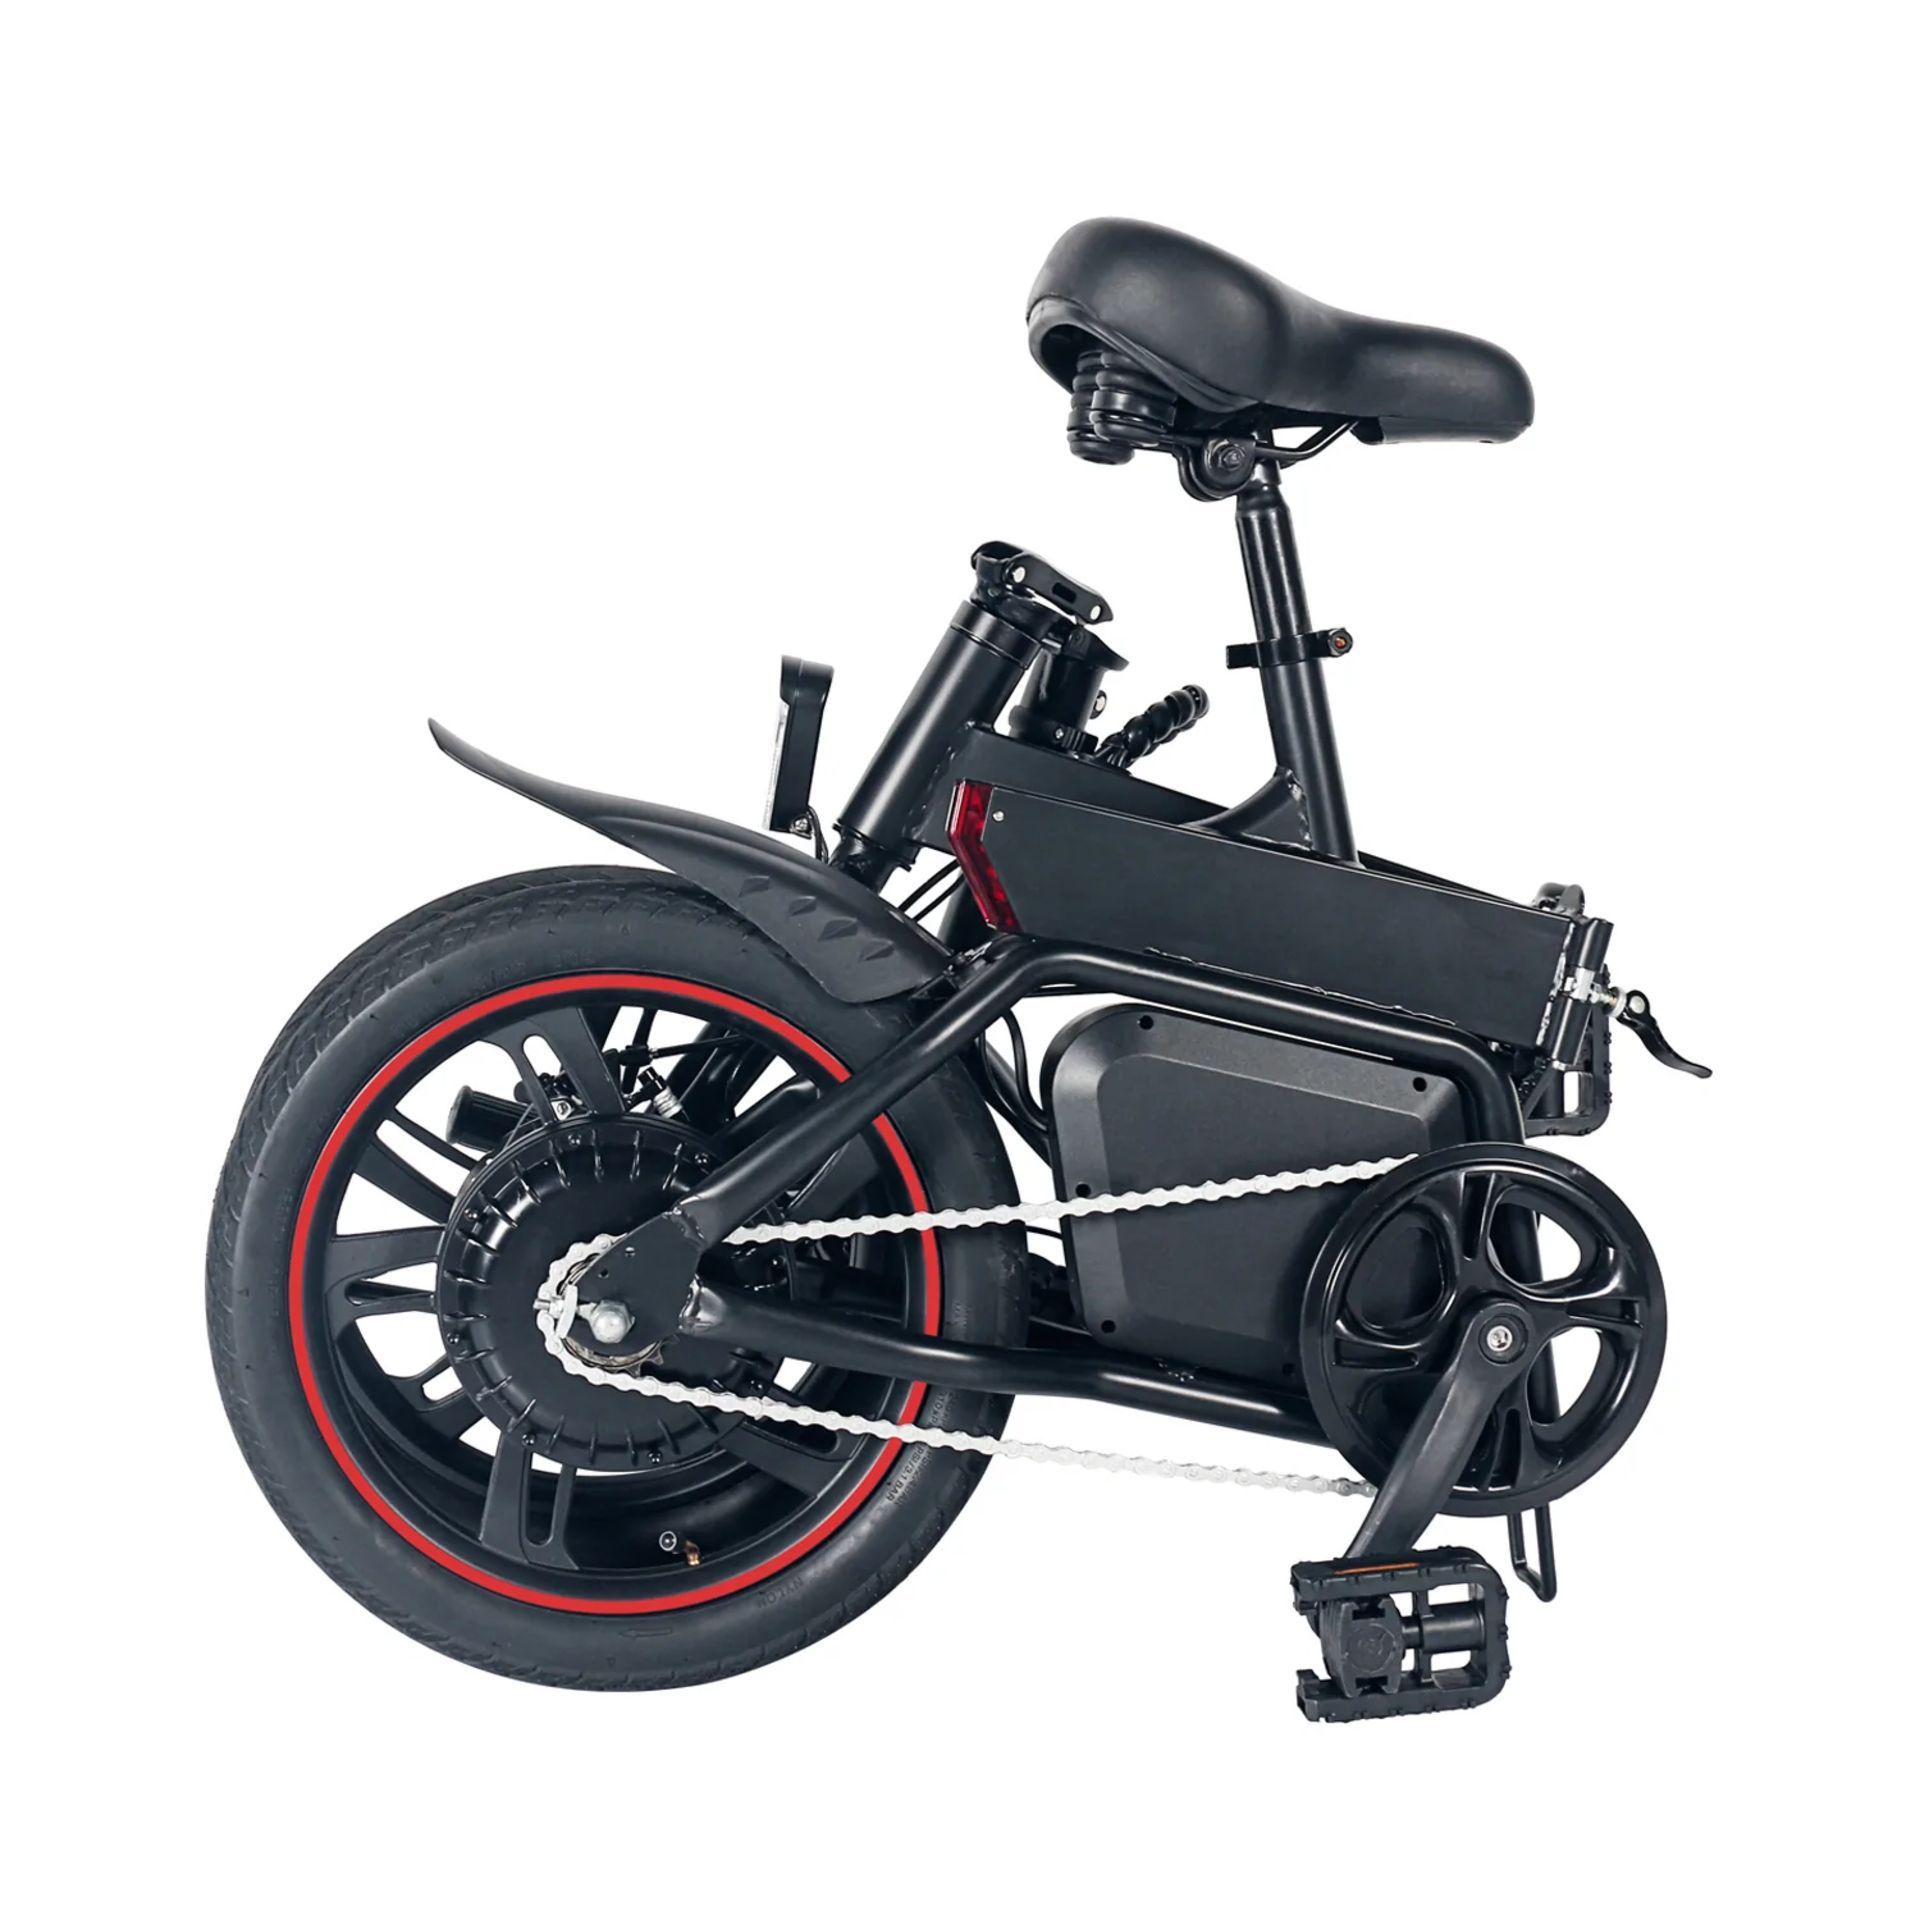 Windgoo B20 Pro Electric Bike. RRP £1,100.99. With 16-inch-wide tires and a frame of upgraded - Image 5 of 6